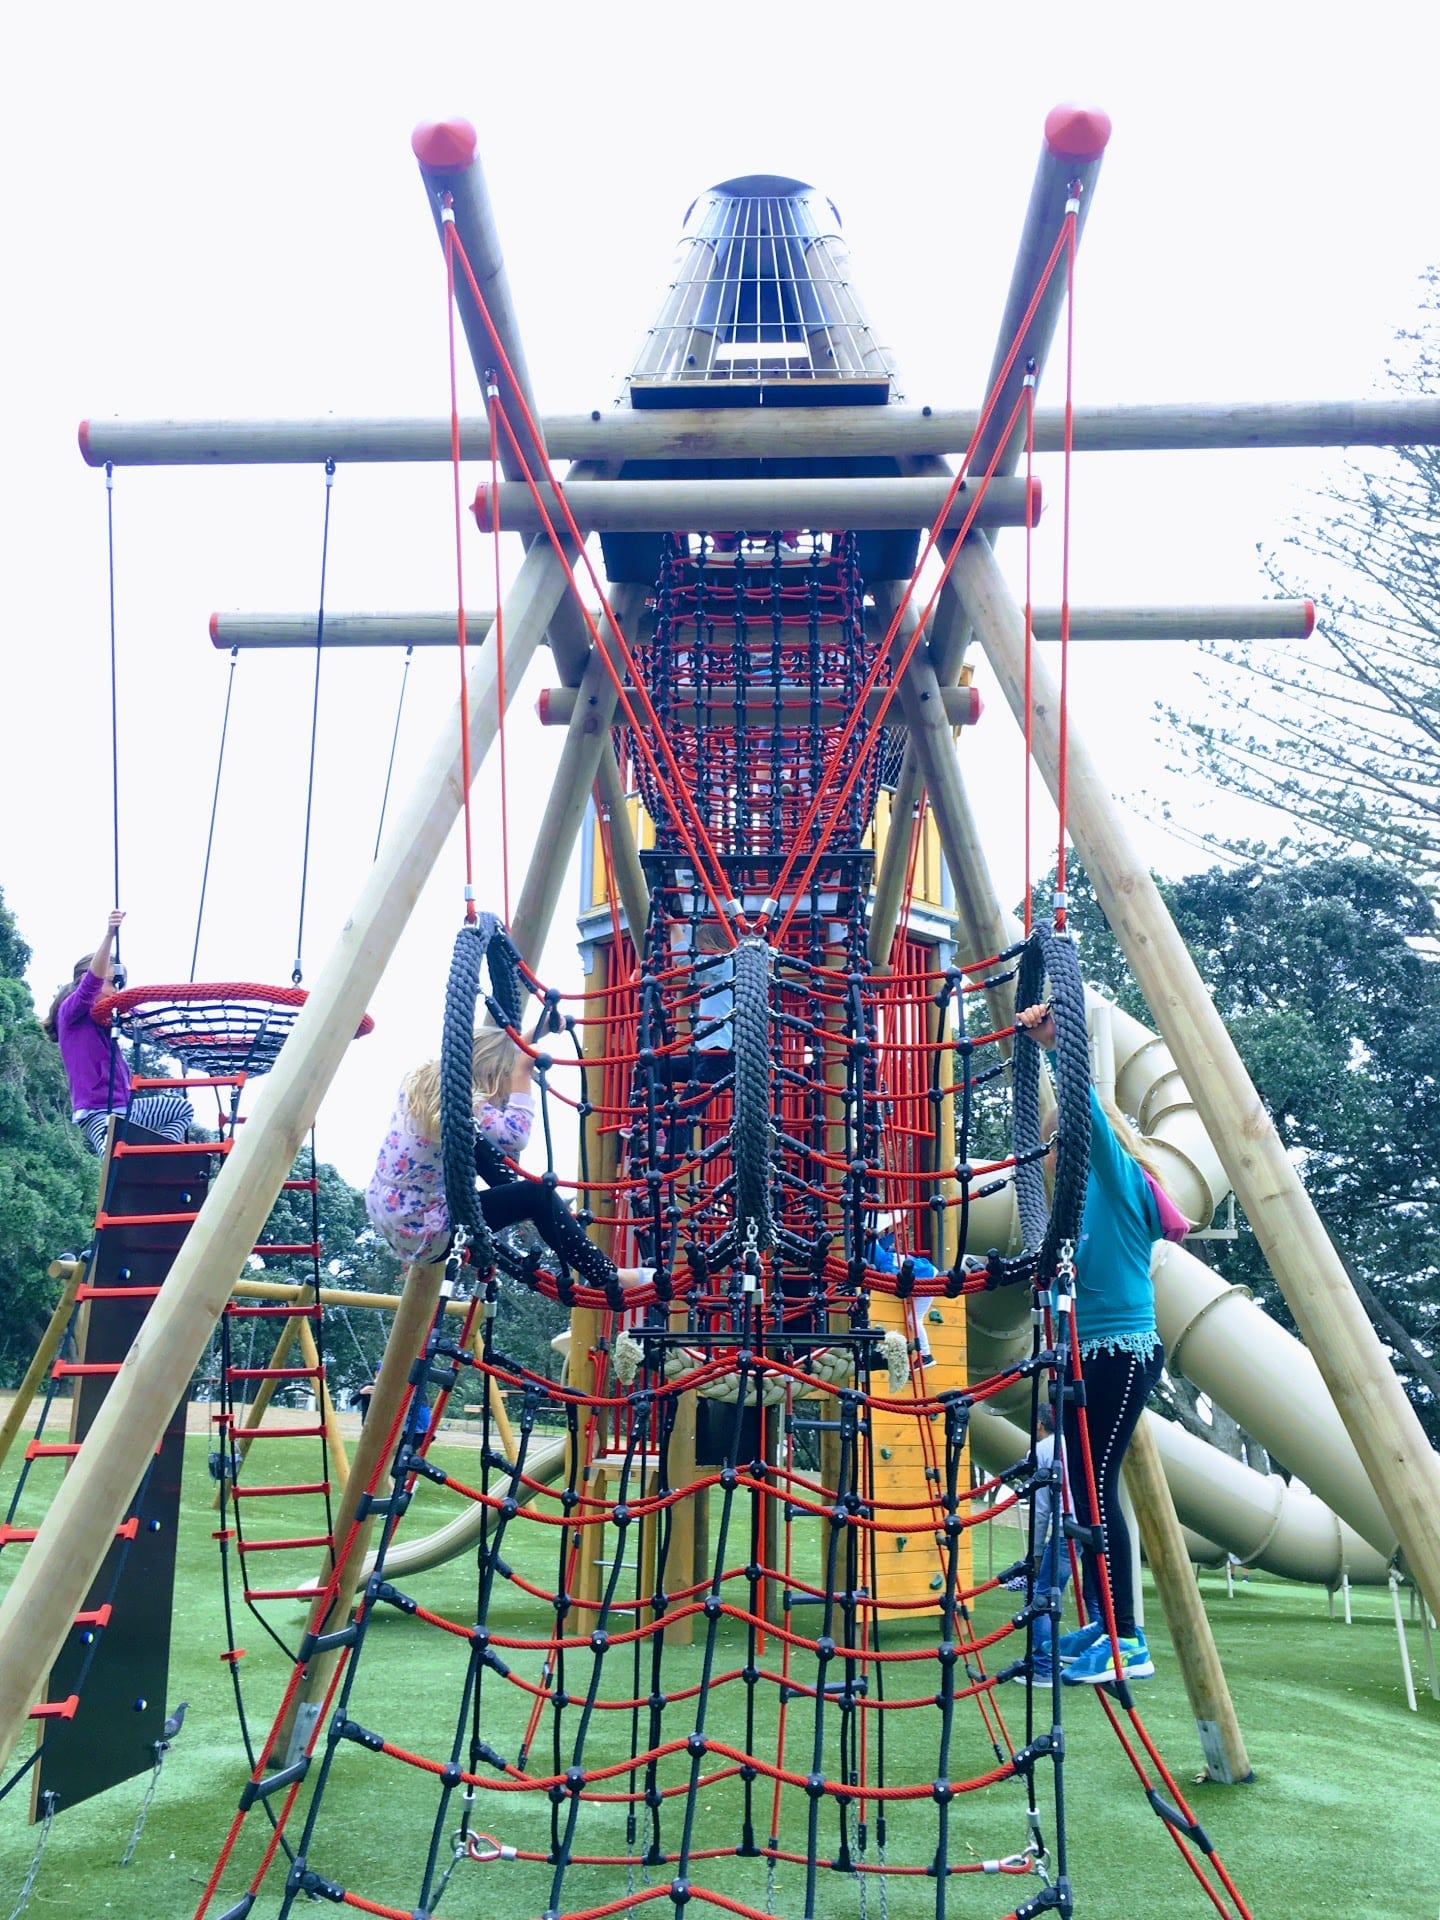 Takapuna Playground (Photo by Auckland for Kids)